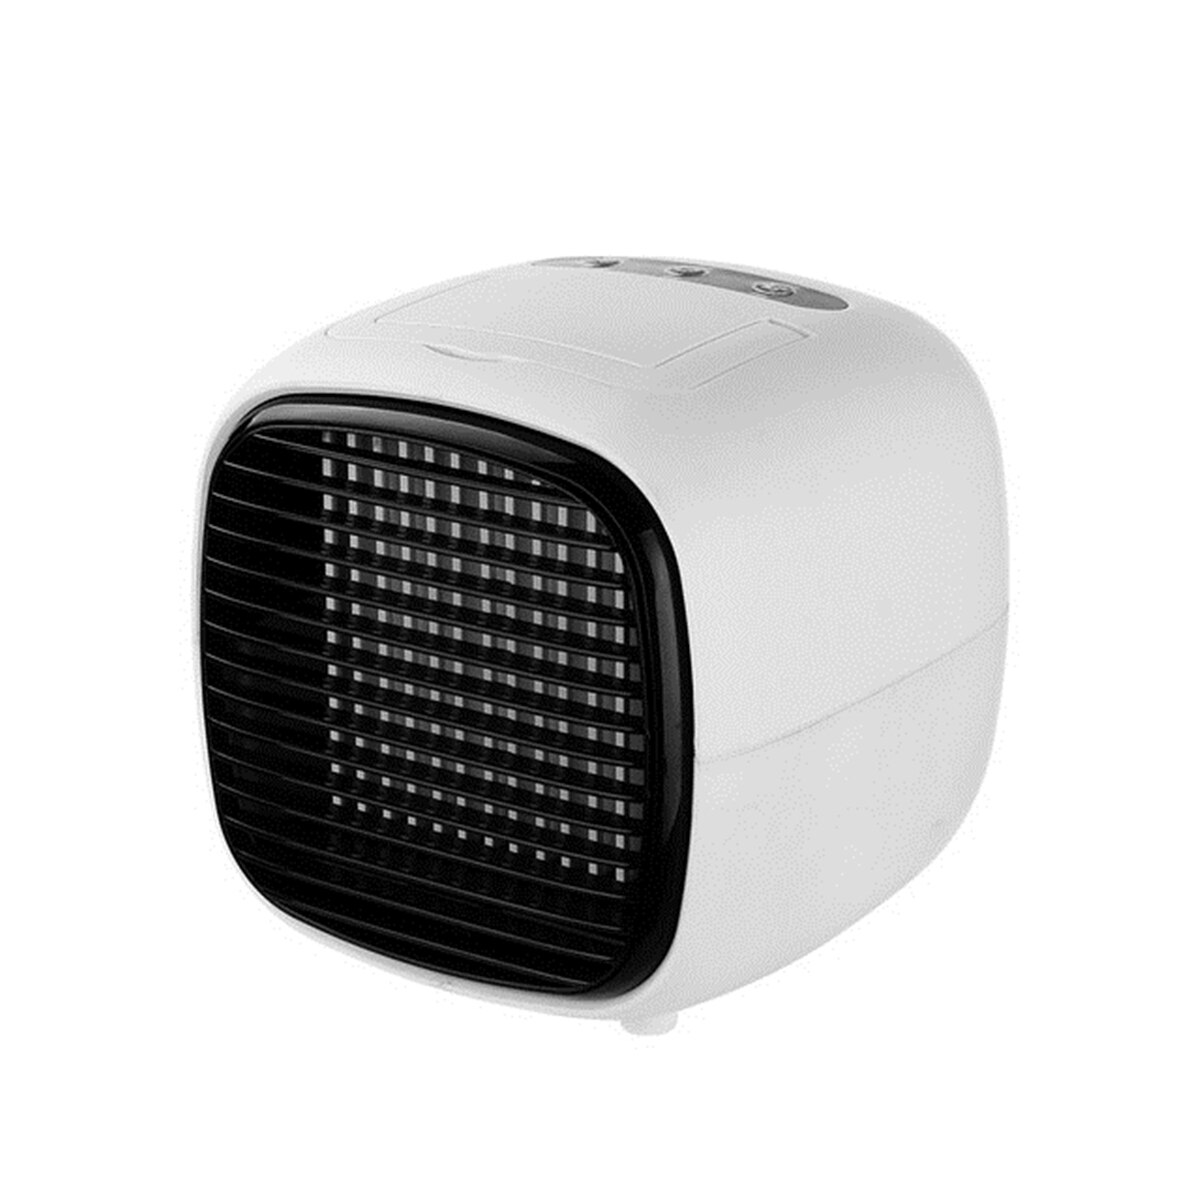 Humidifiers Mini Air Conditioner Air Cooler Fans USB Portable Air Cooler Table mini Fan For Office Home Car Refrigerating Device: White